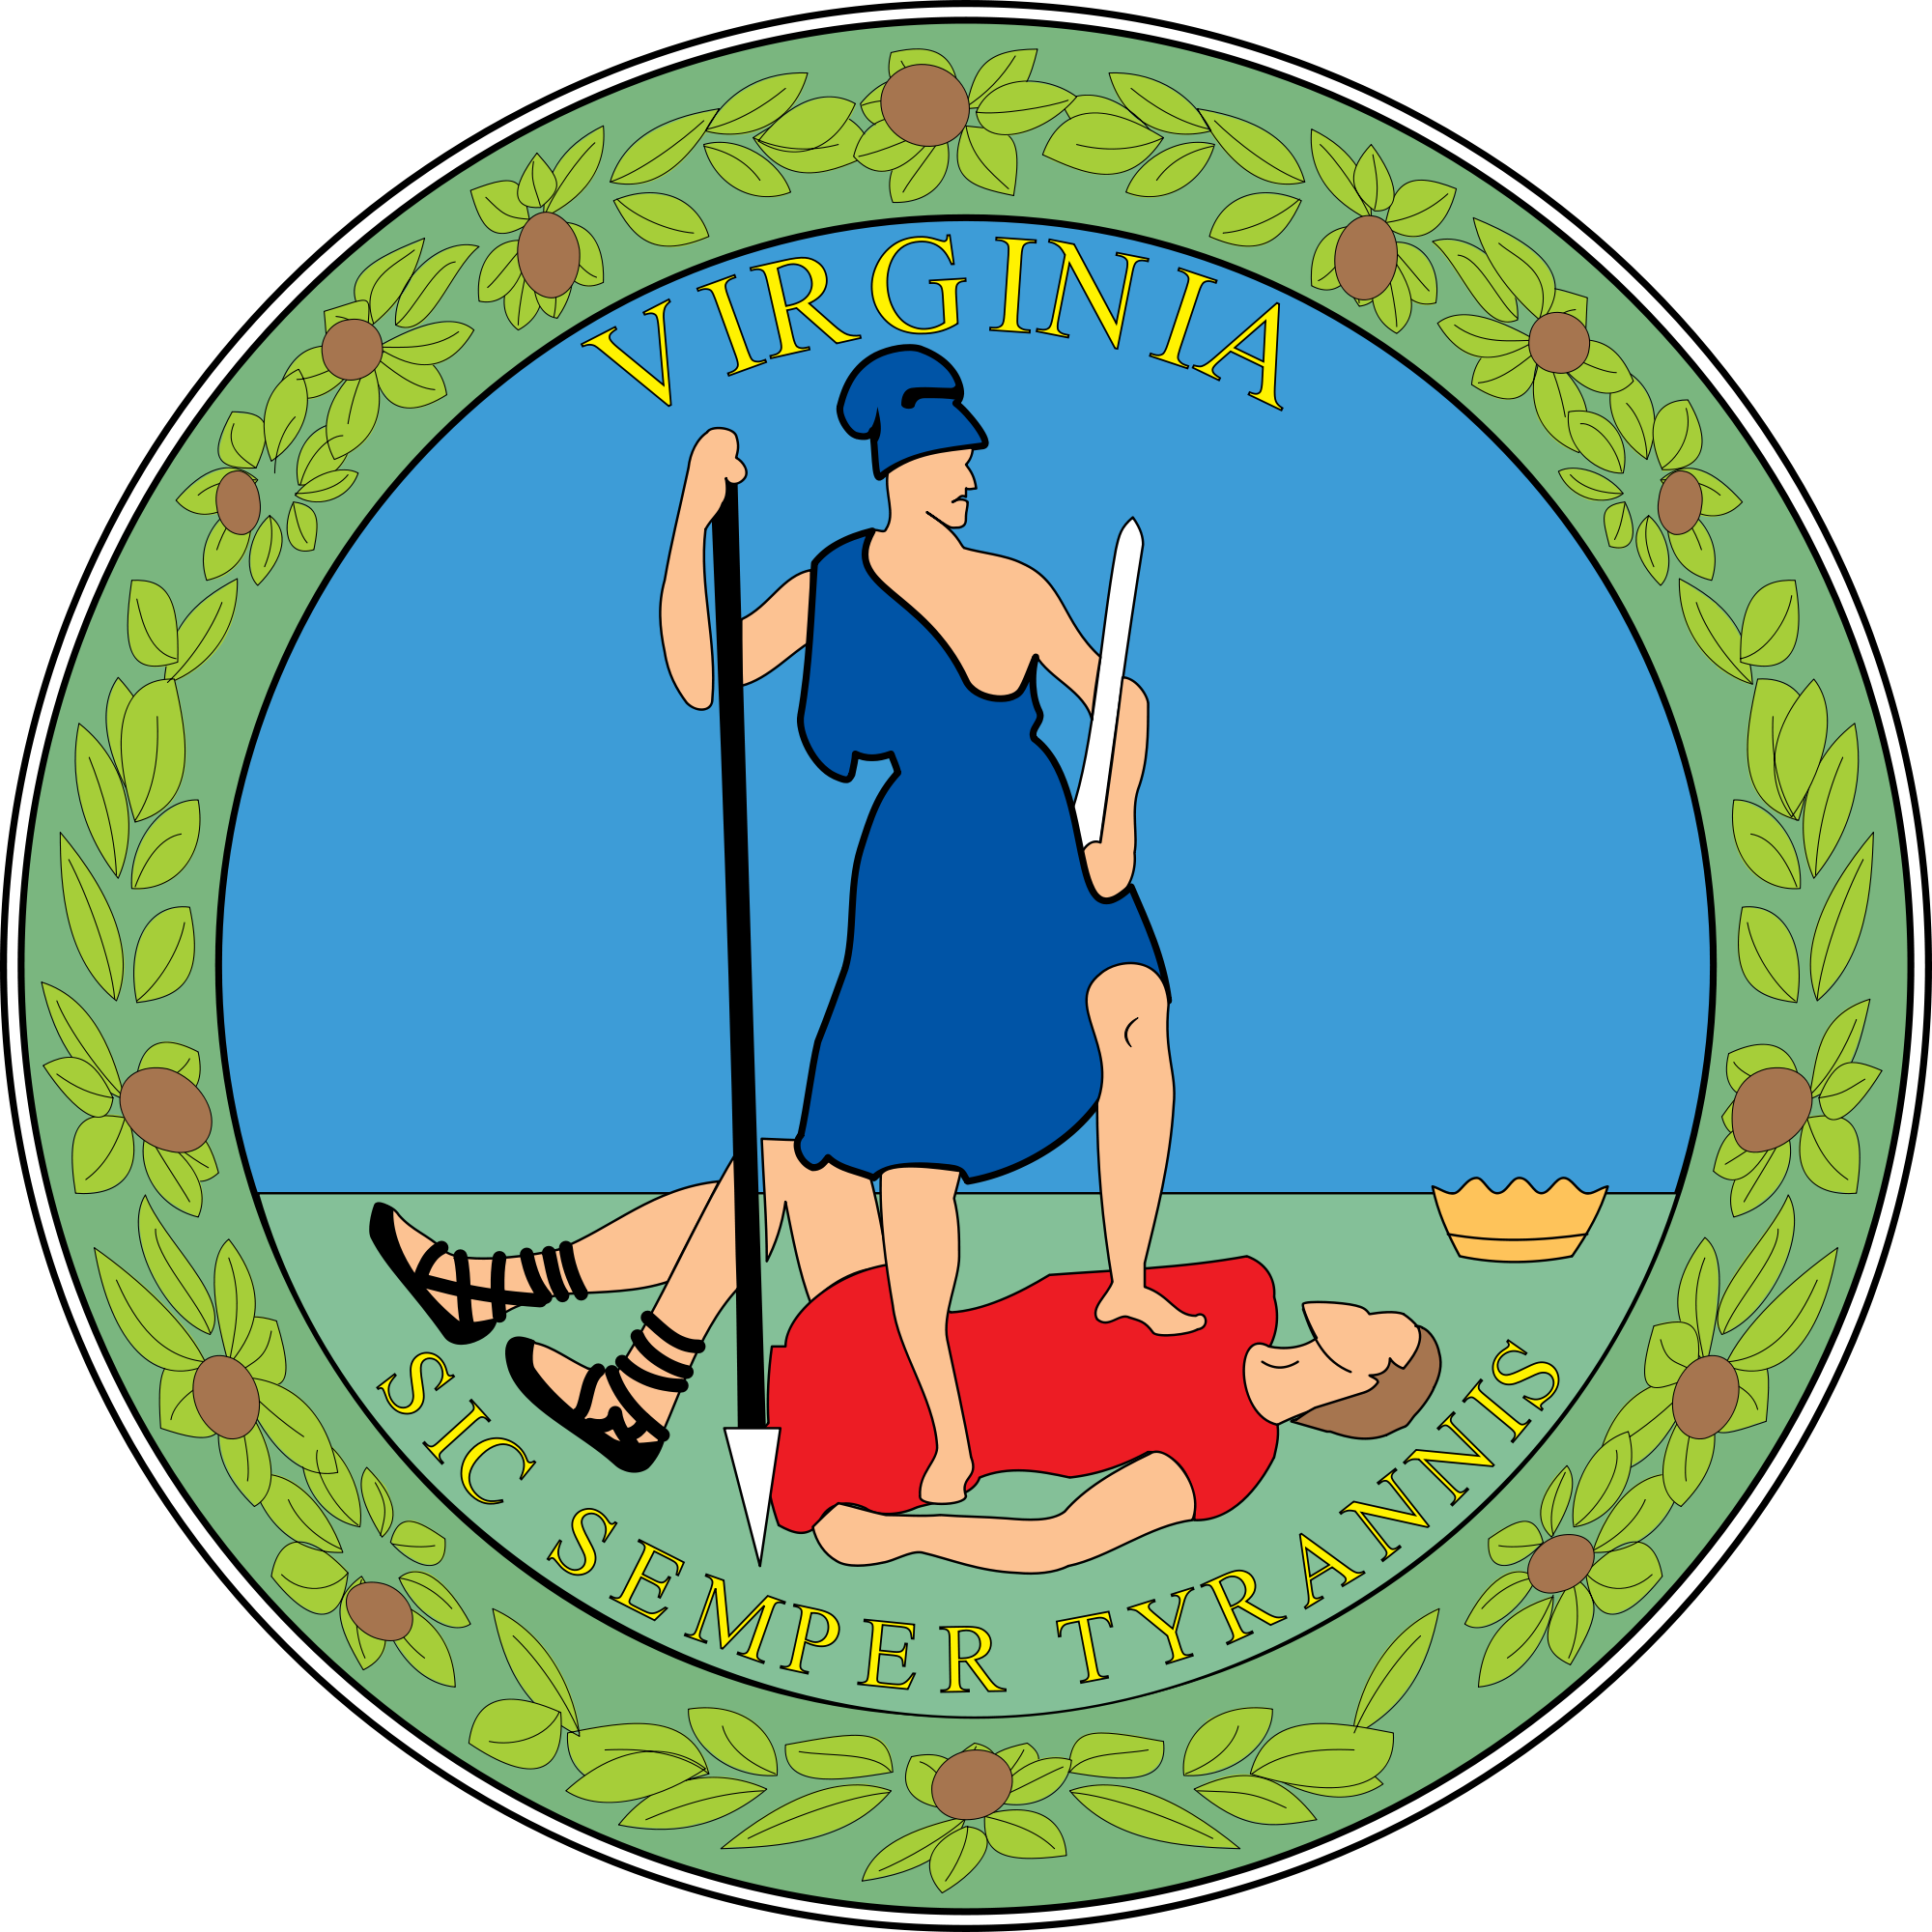 240 × 240 Pixels - State Seal For Virginia (2000x2000)